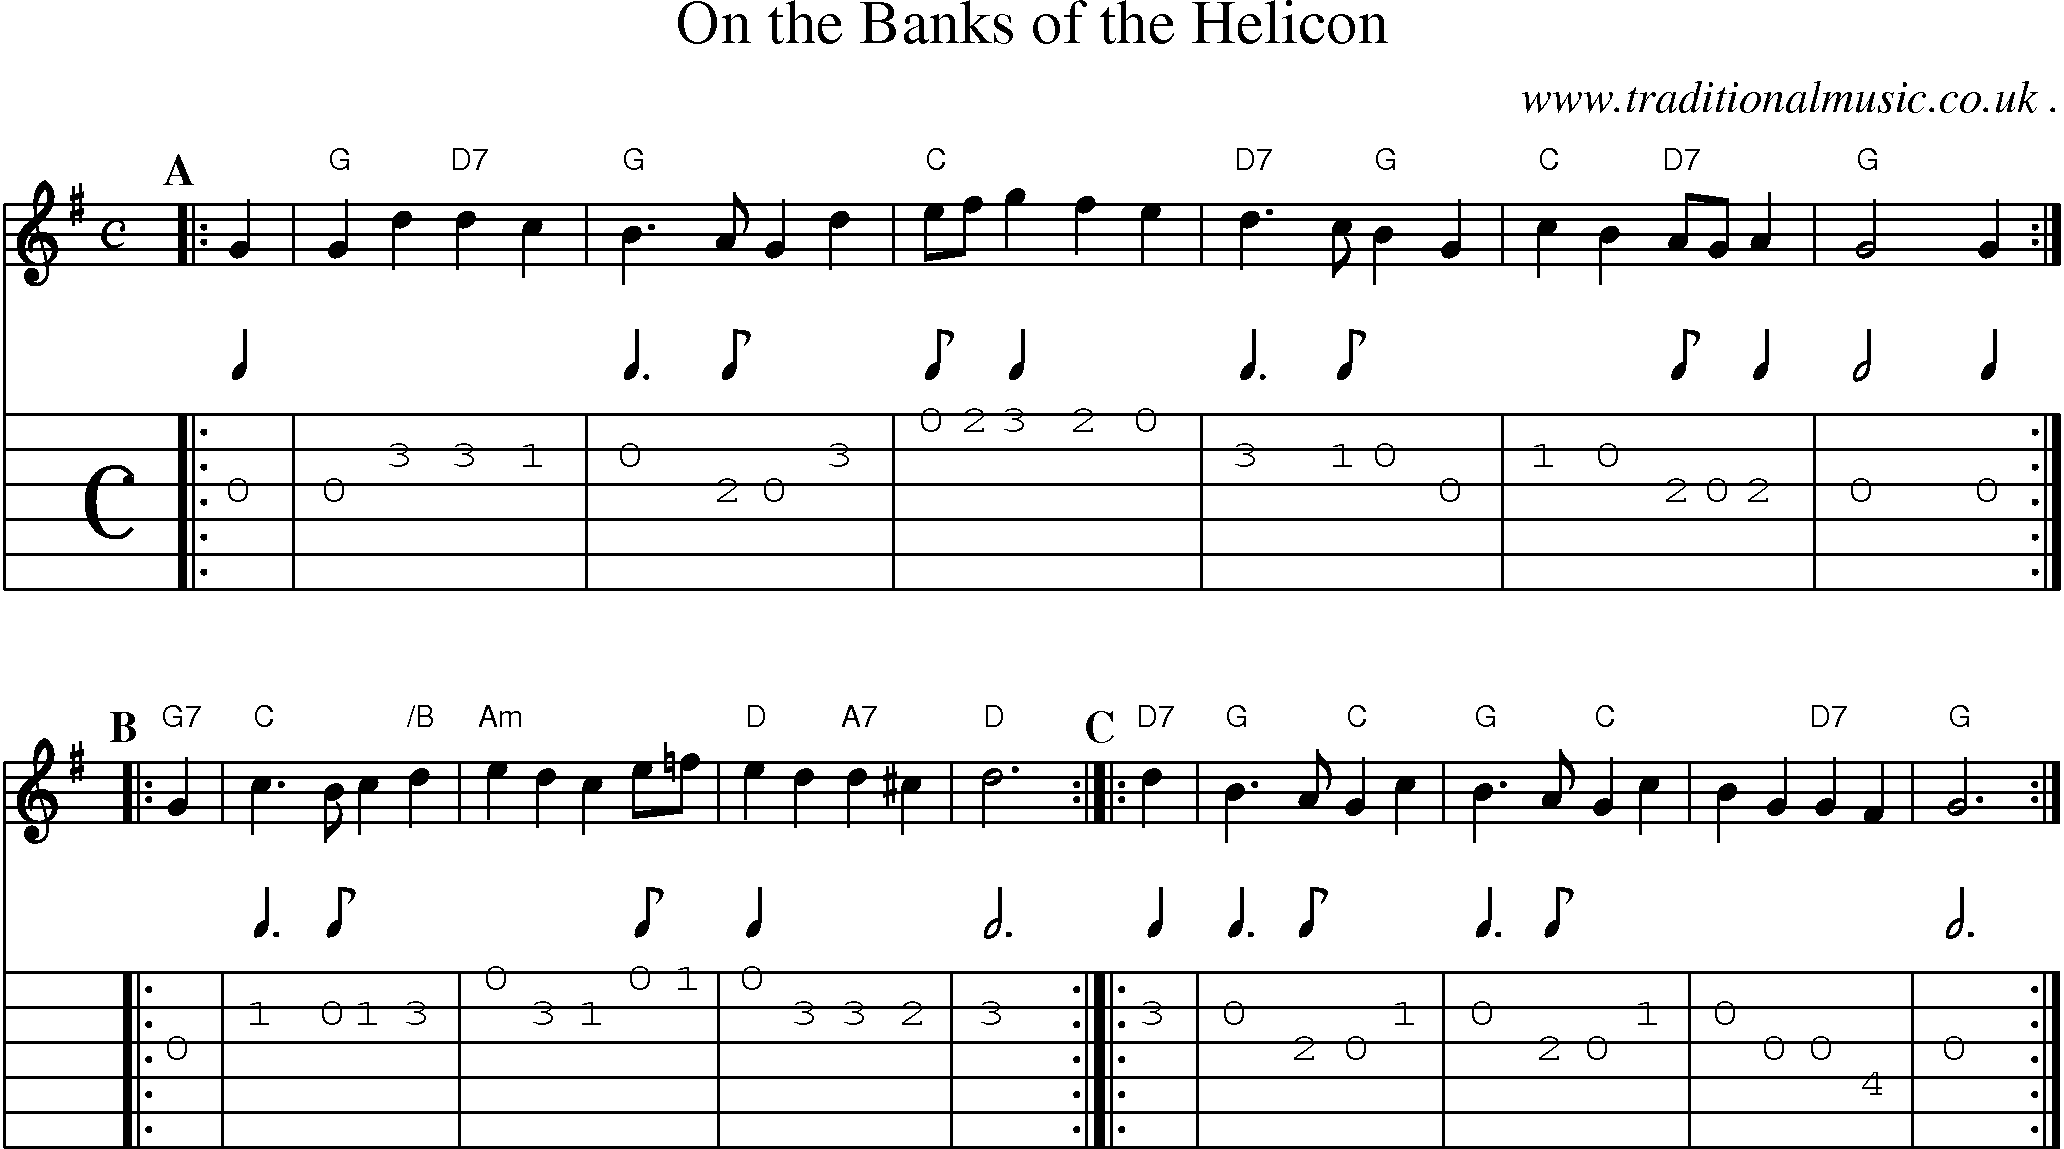 Sheet-music  score, Chords and Guitar Tabs for On The Banks Of The Helicon